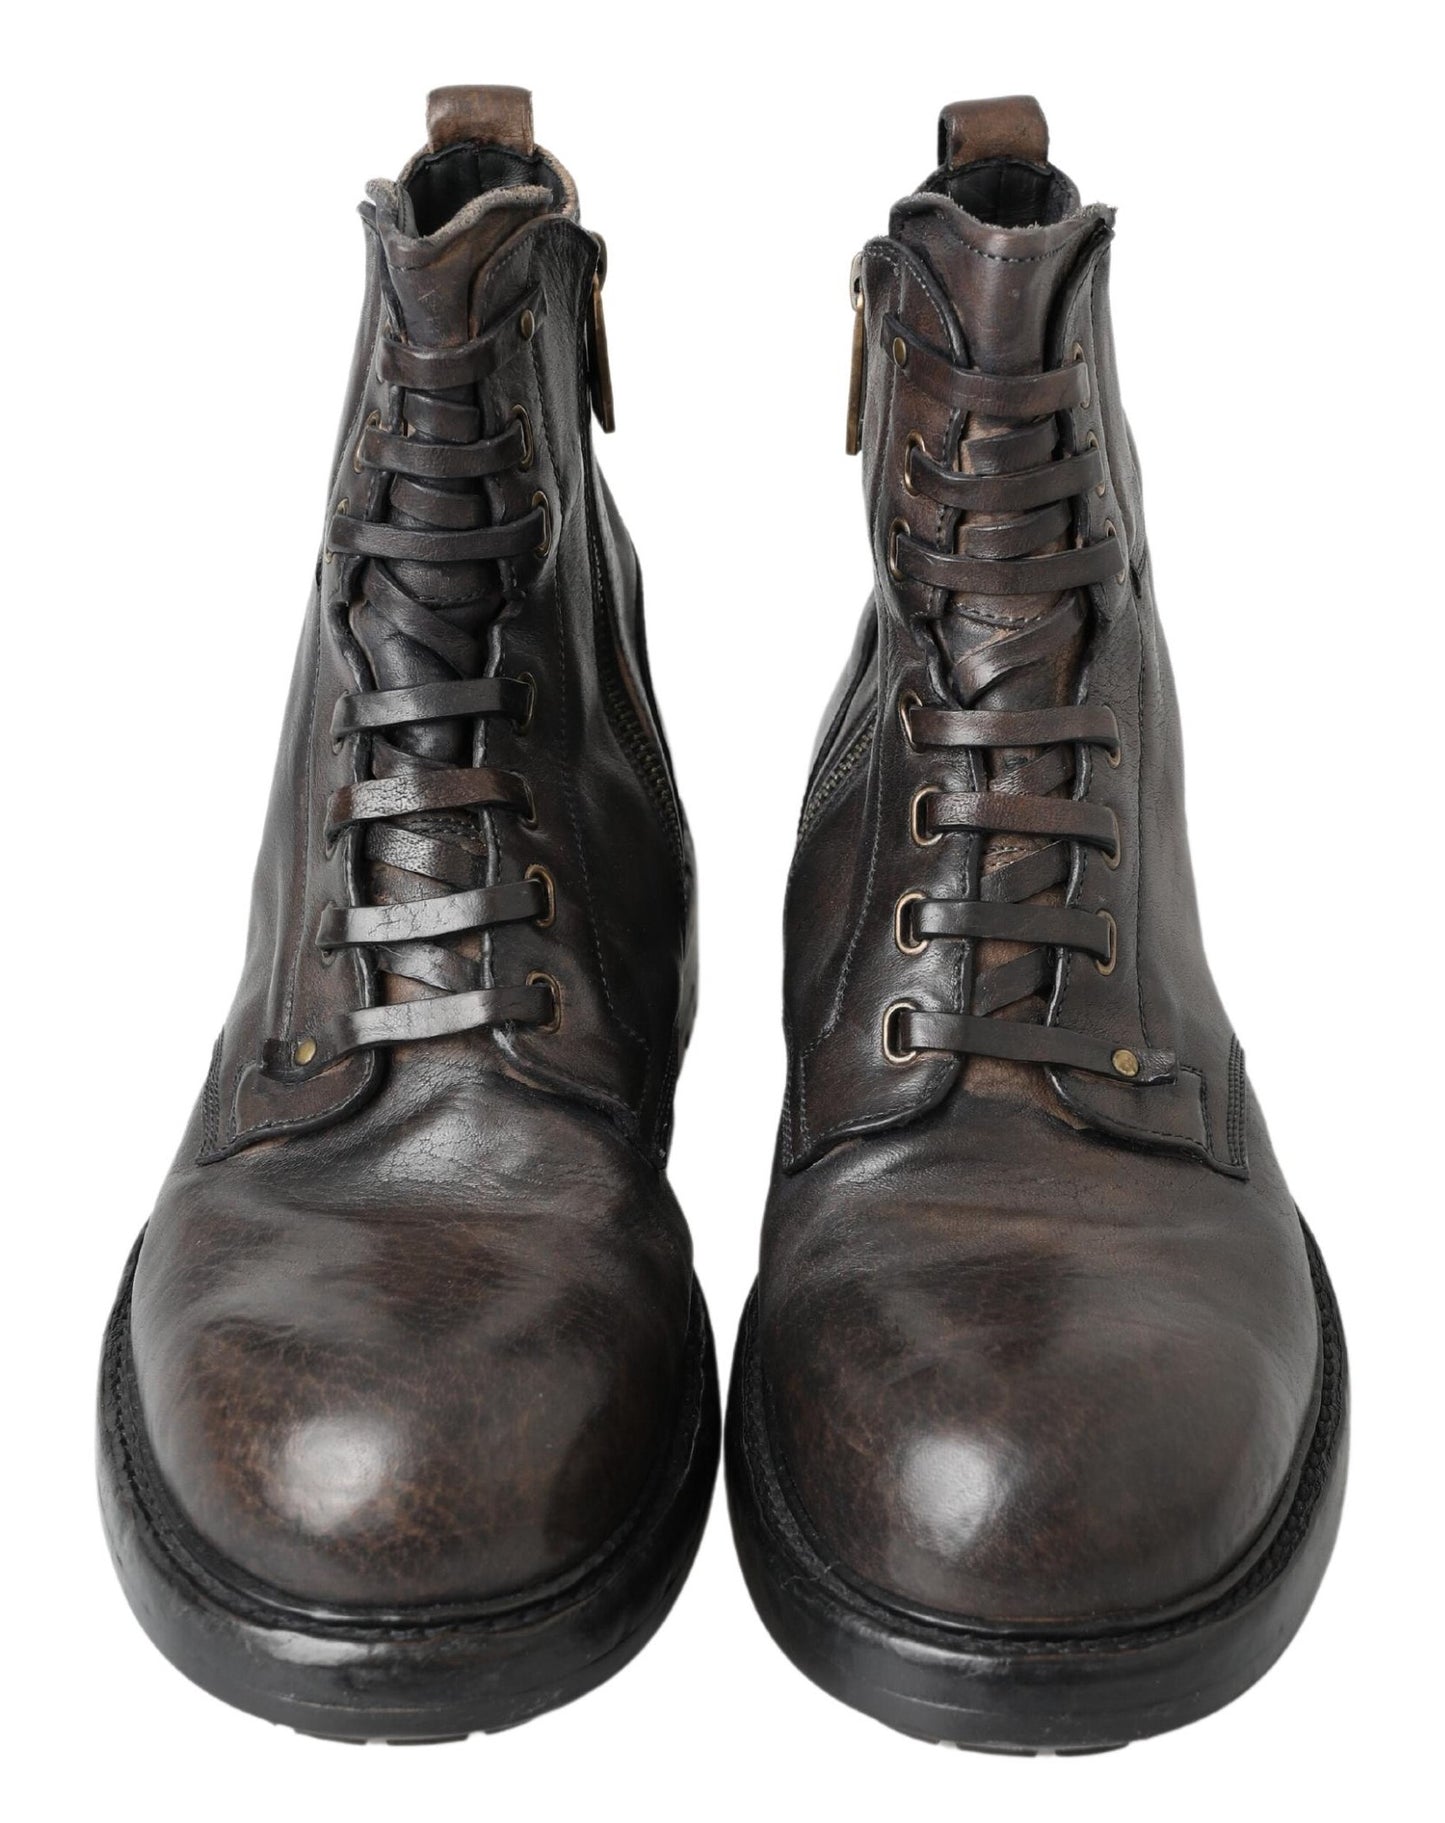 Italian Leather Combat Boots in Rich Brown